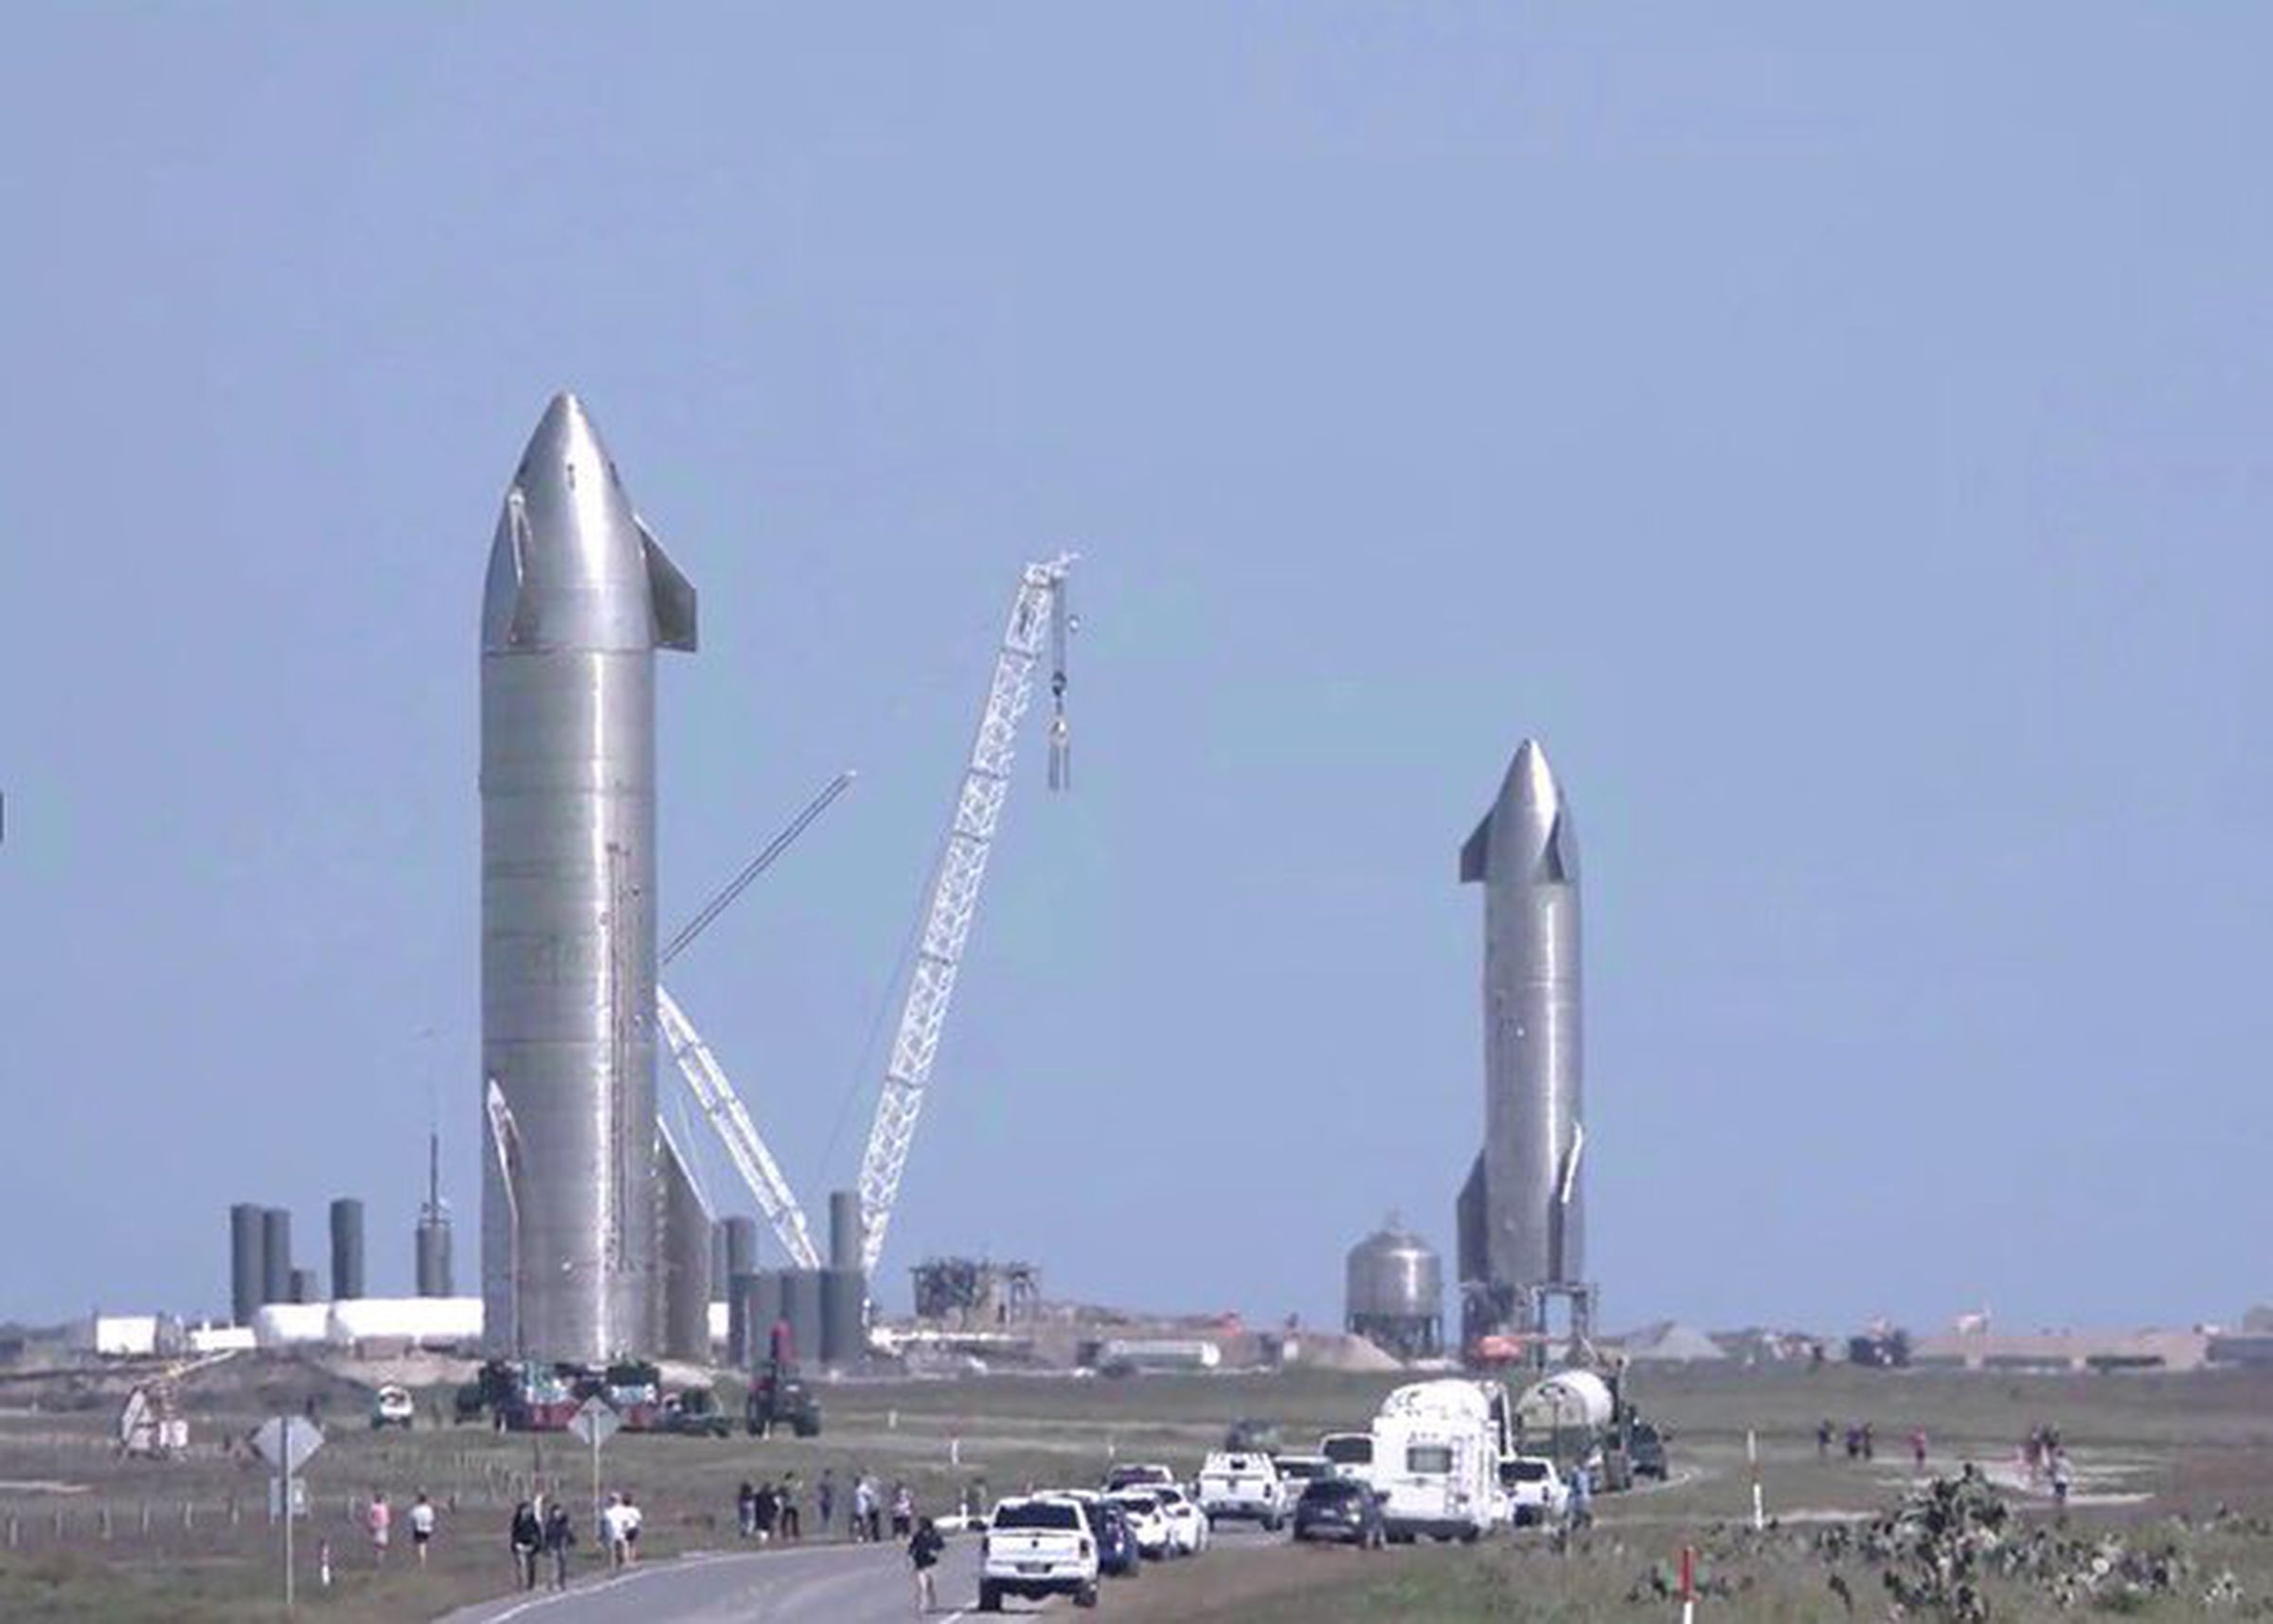 Two since-destroyed Starship prototypes stand at SpaceX’s Boca Chica, Texas Starship facilities.